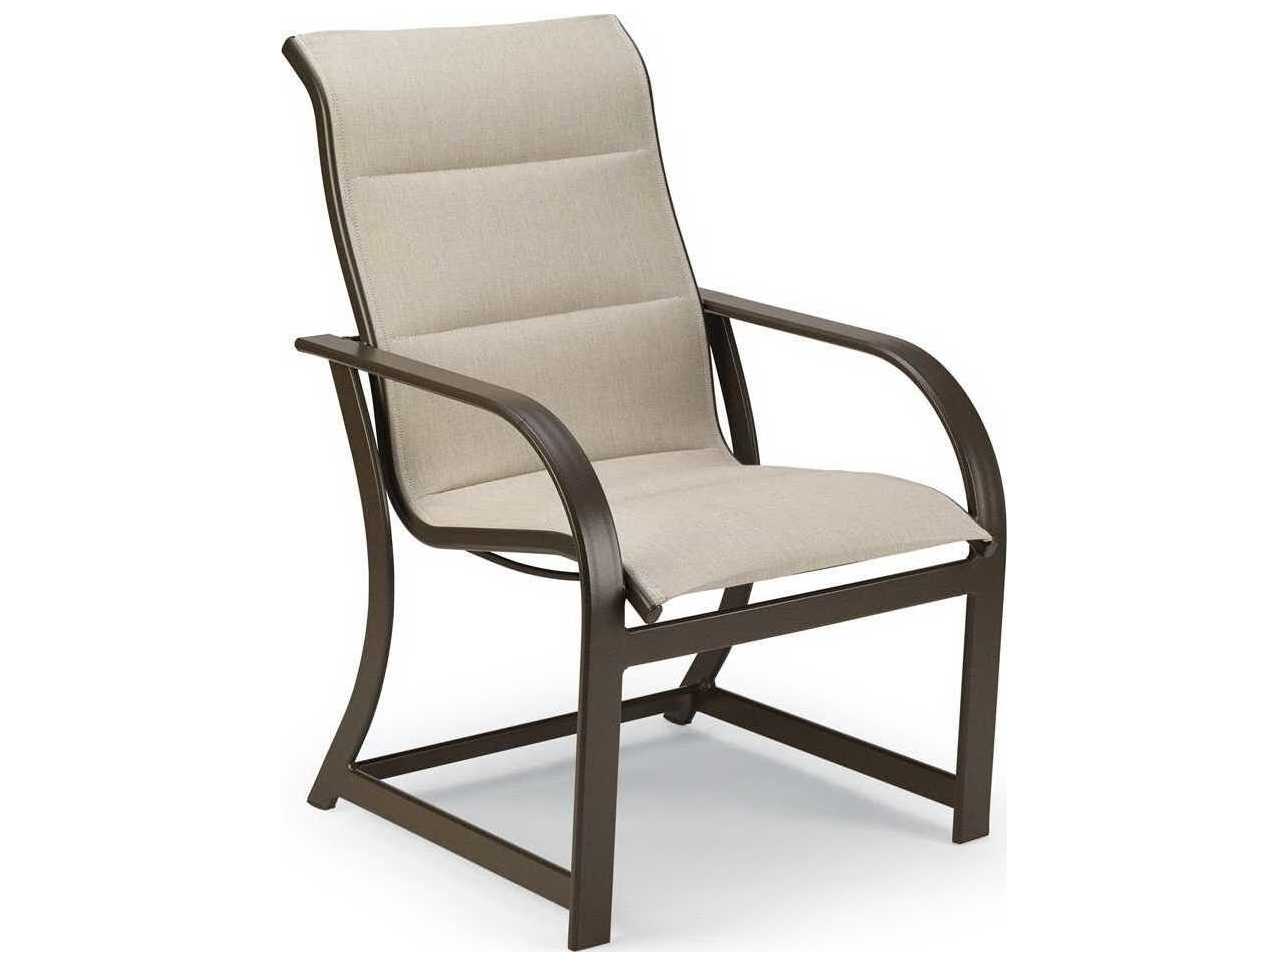 Winston Key West Padded Sling Aluminum High Back Dining Chair WSM8001PS